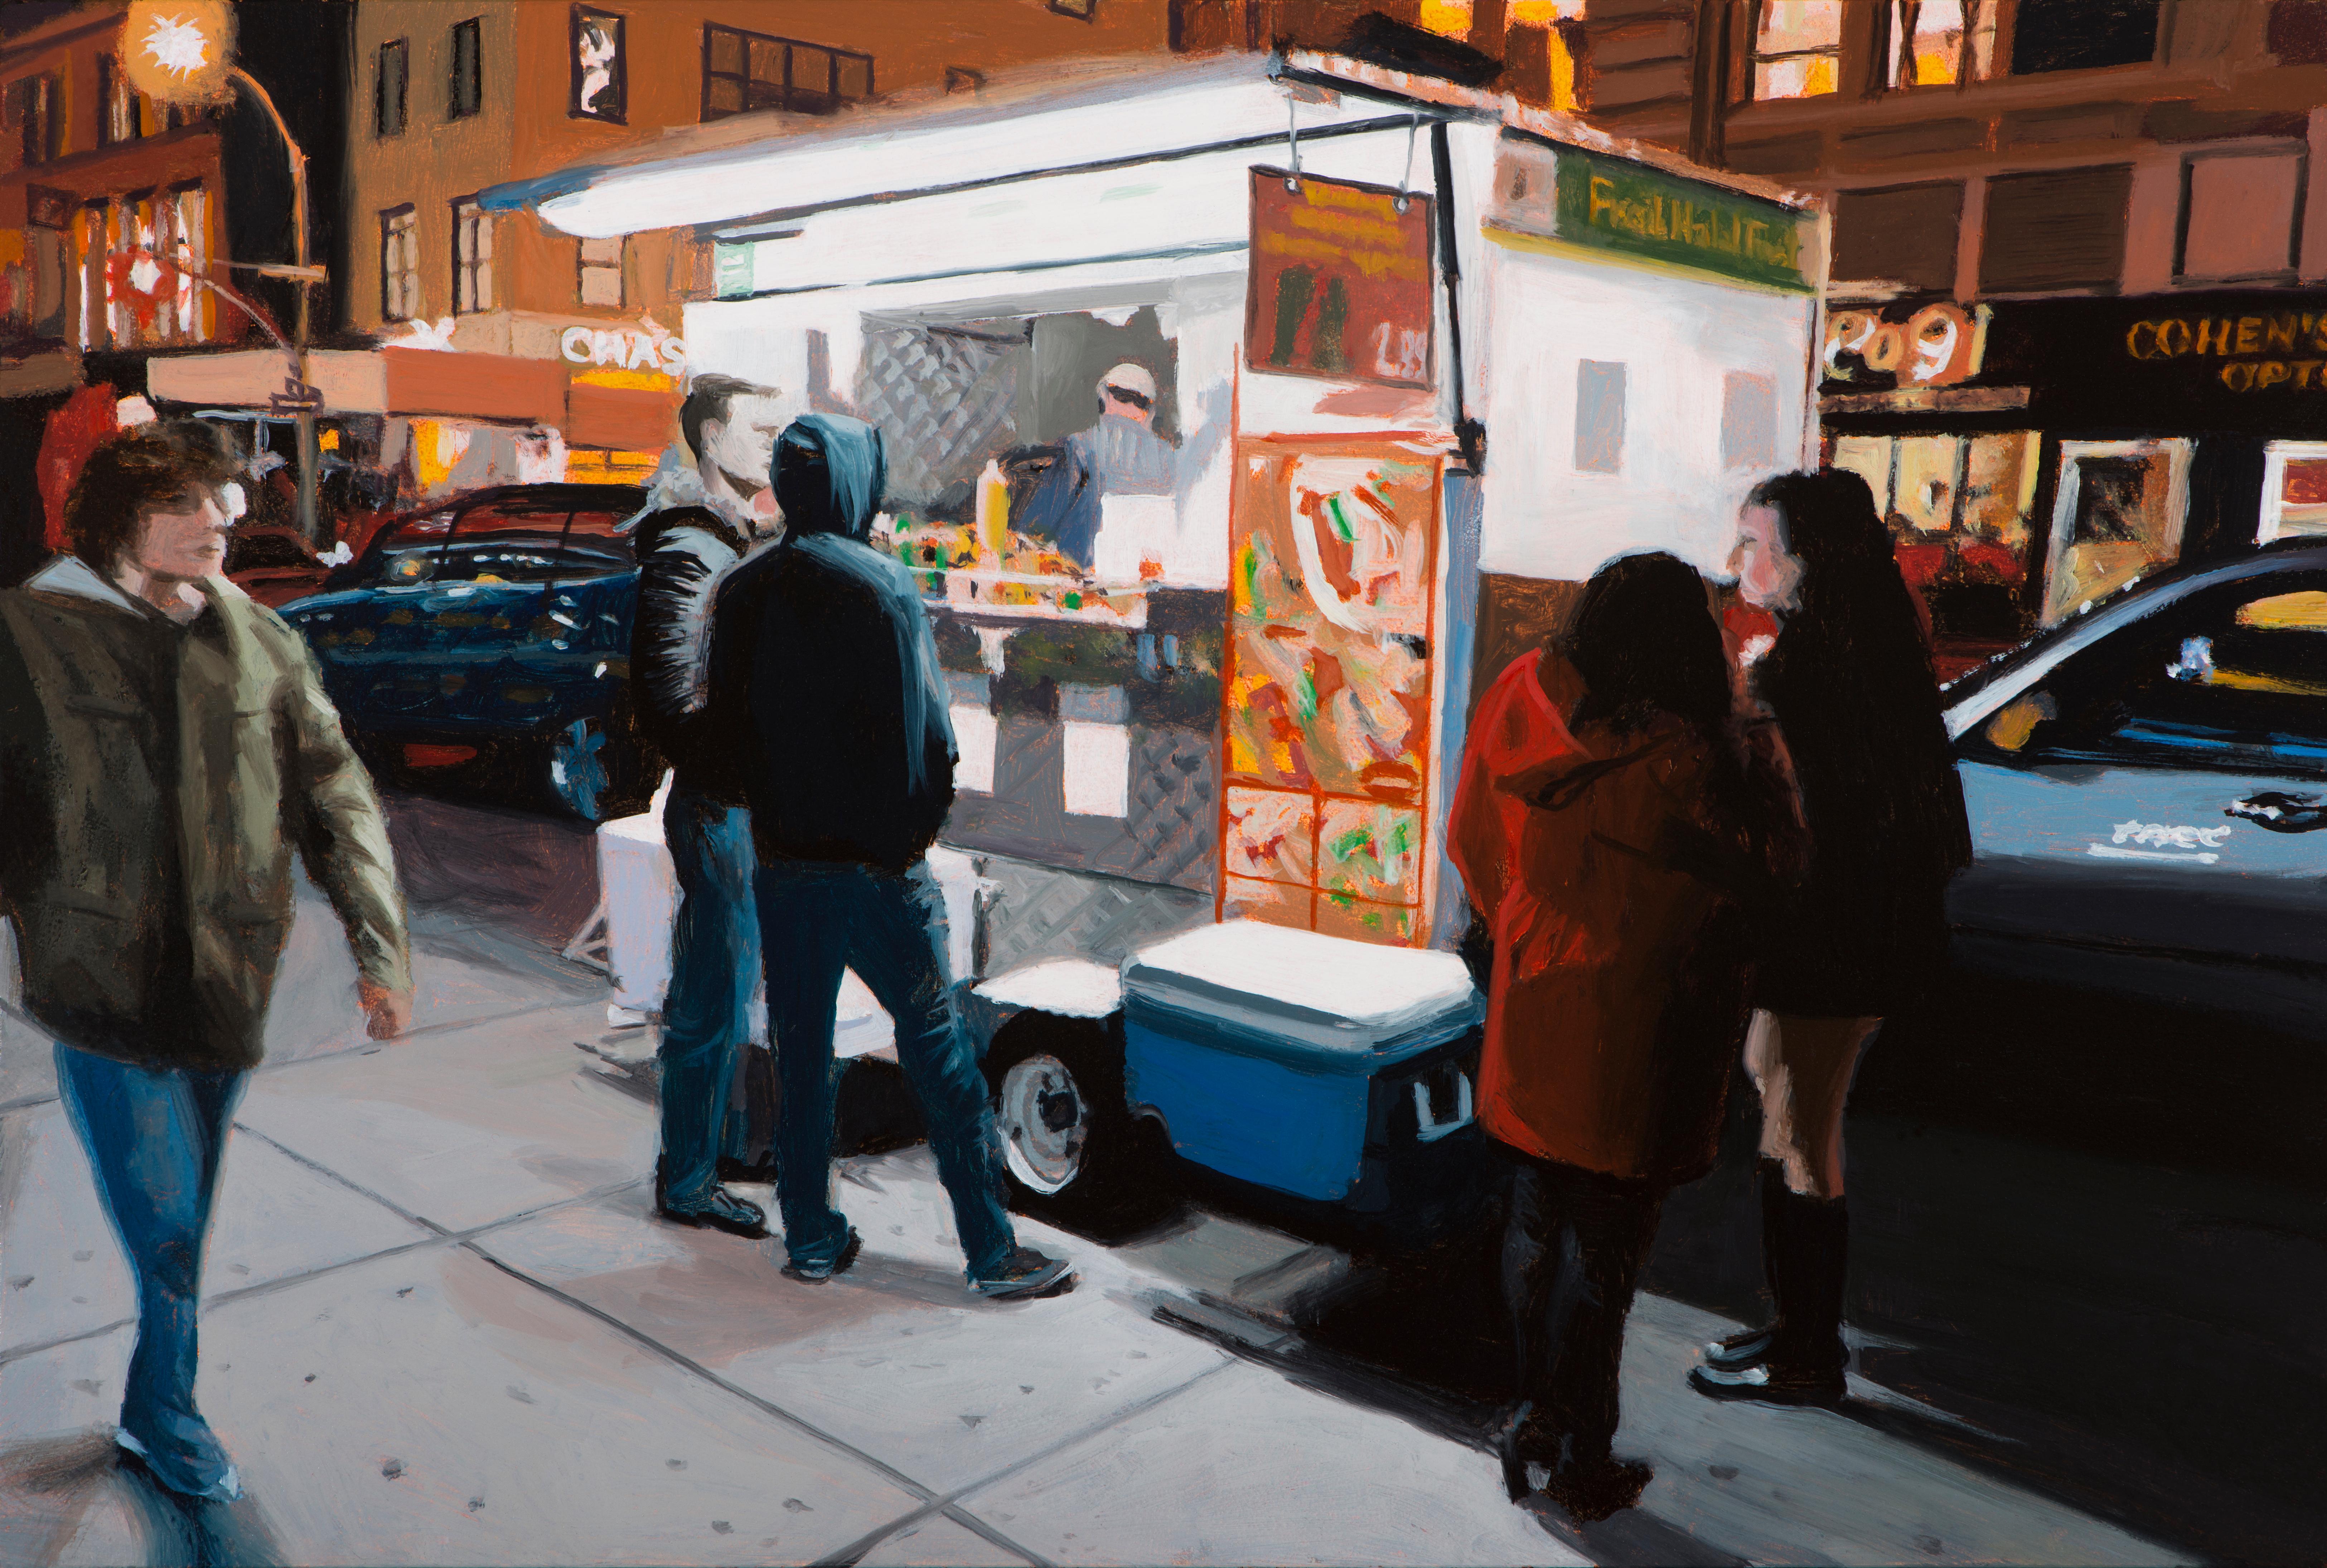 Seth Tane Landscape Painting - small scale realist painting, "Union Sqaure Halal", night scene